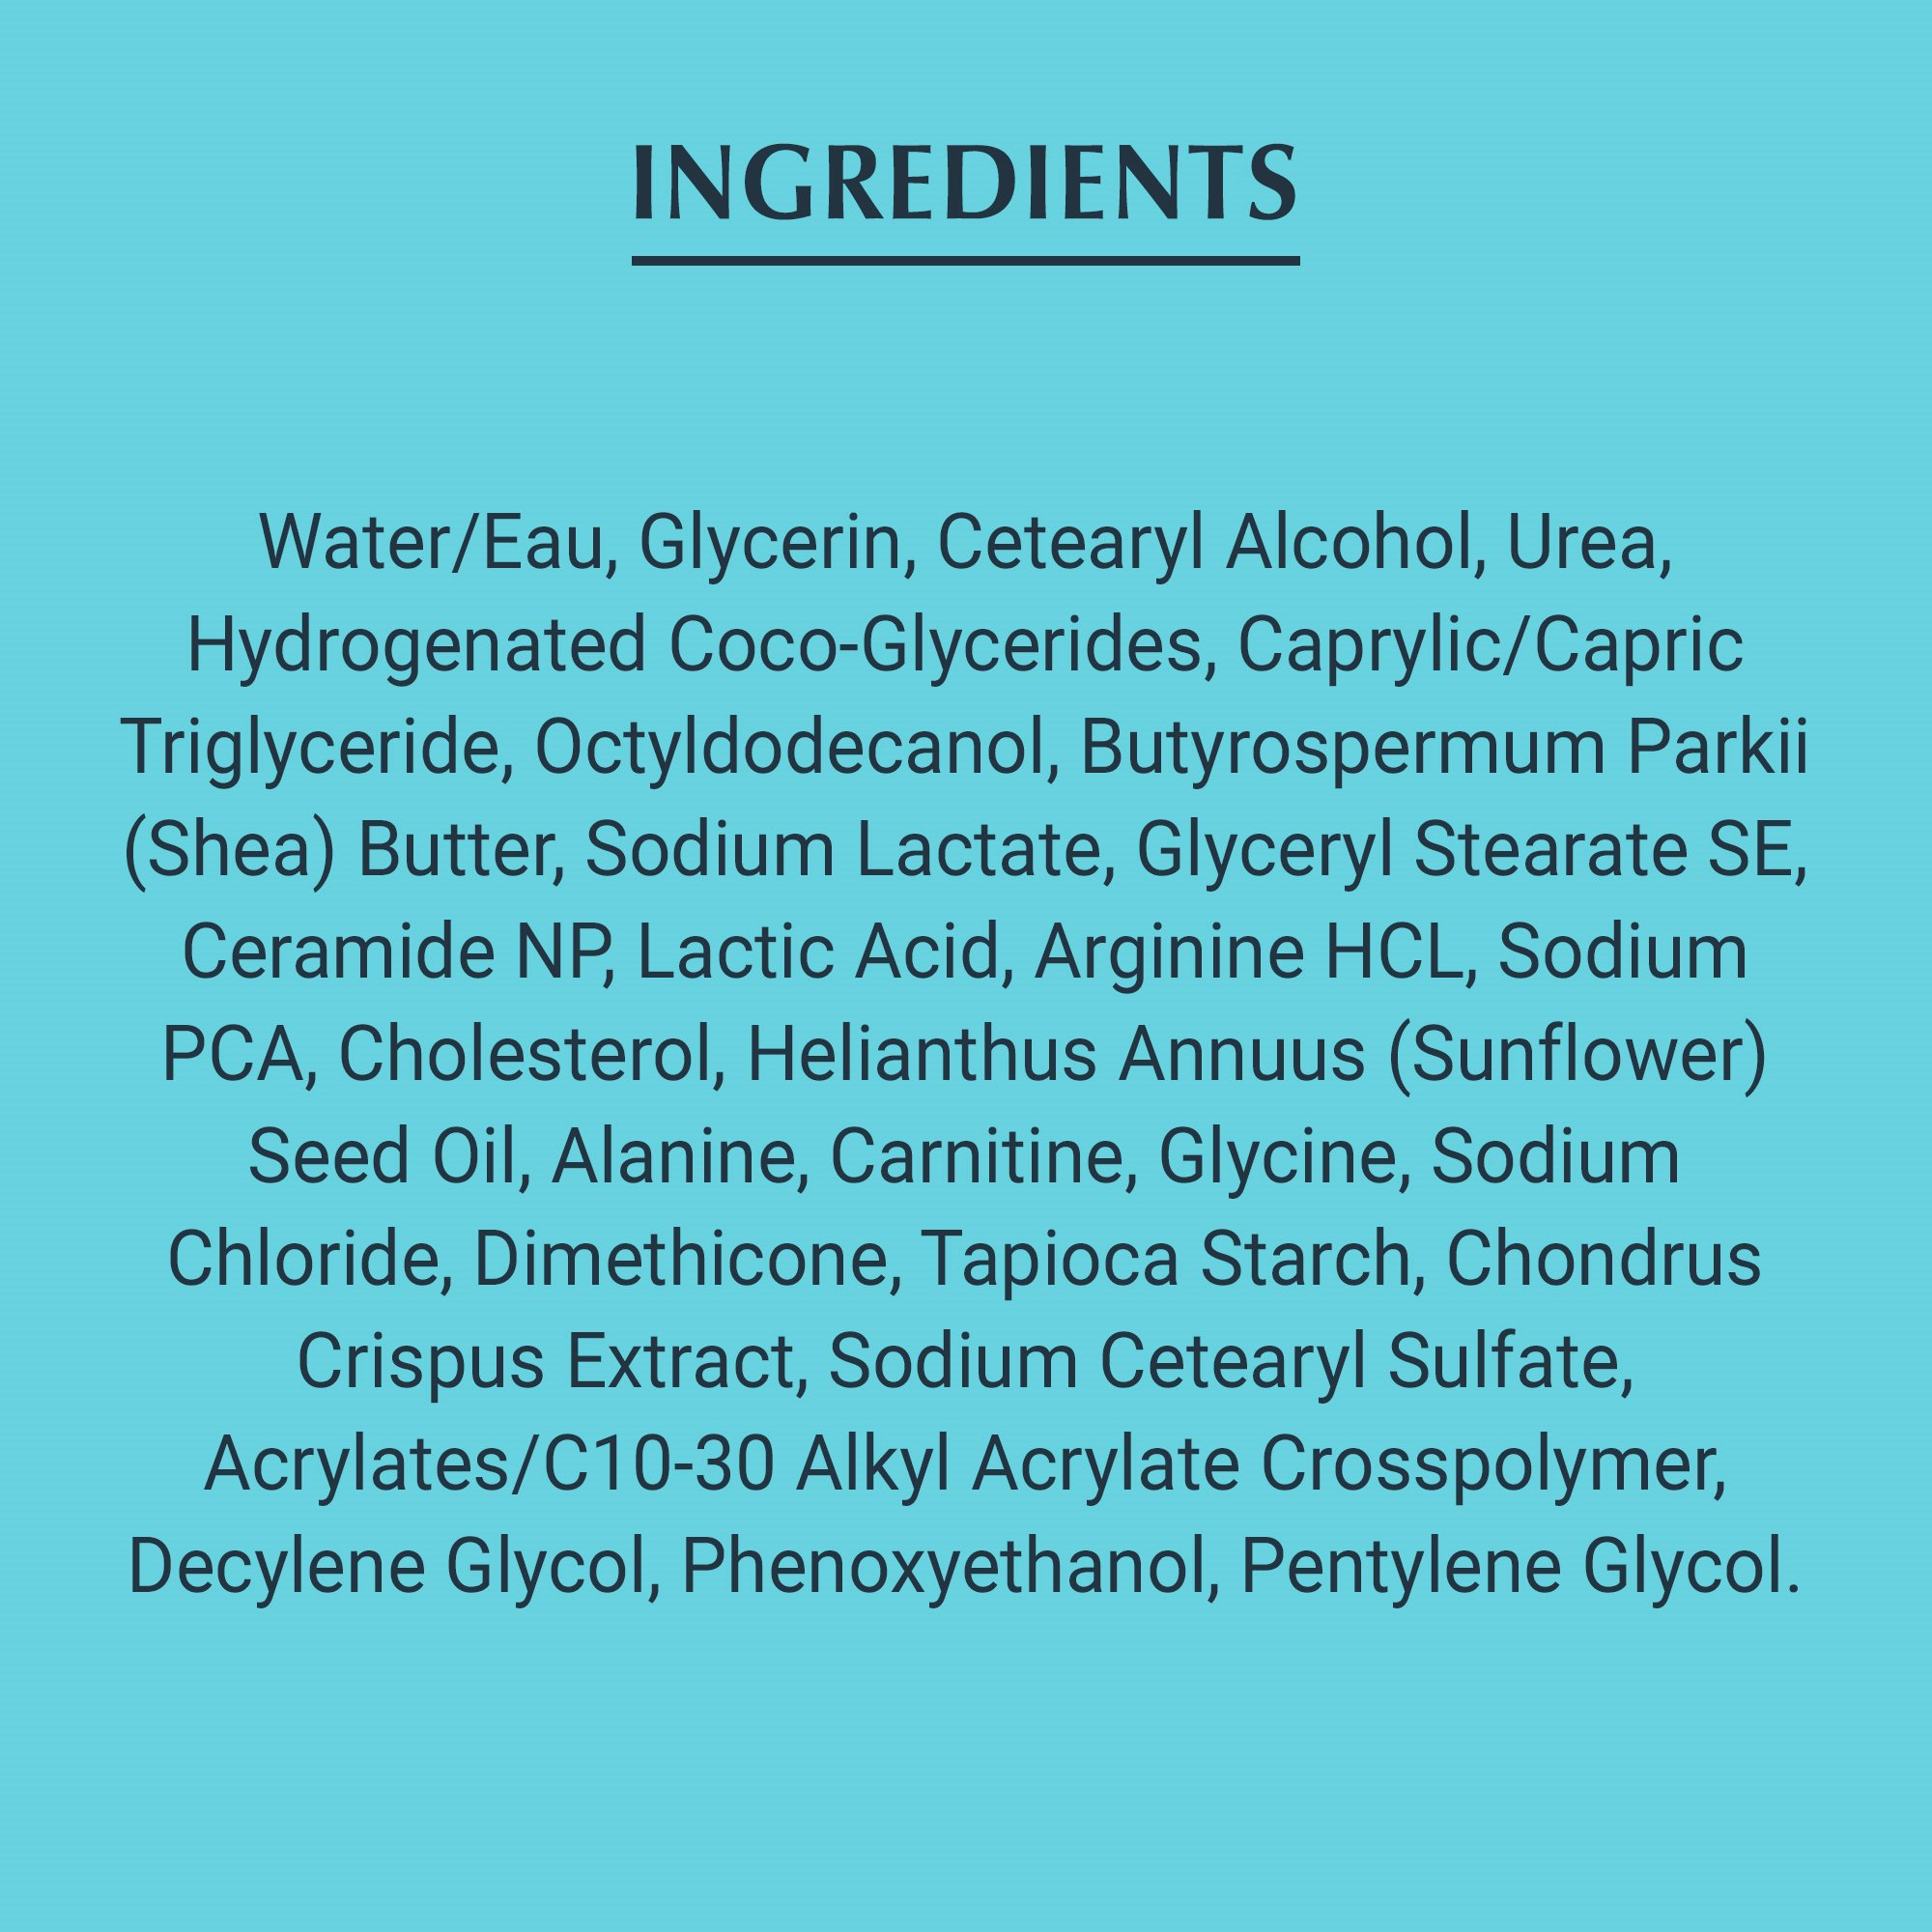 Image of The Eucerin Complete Repair CreamIngredients list on a bright teal background.